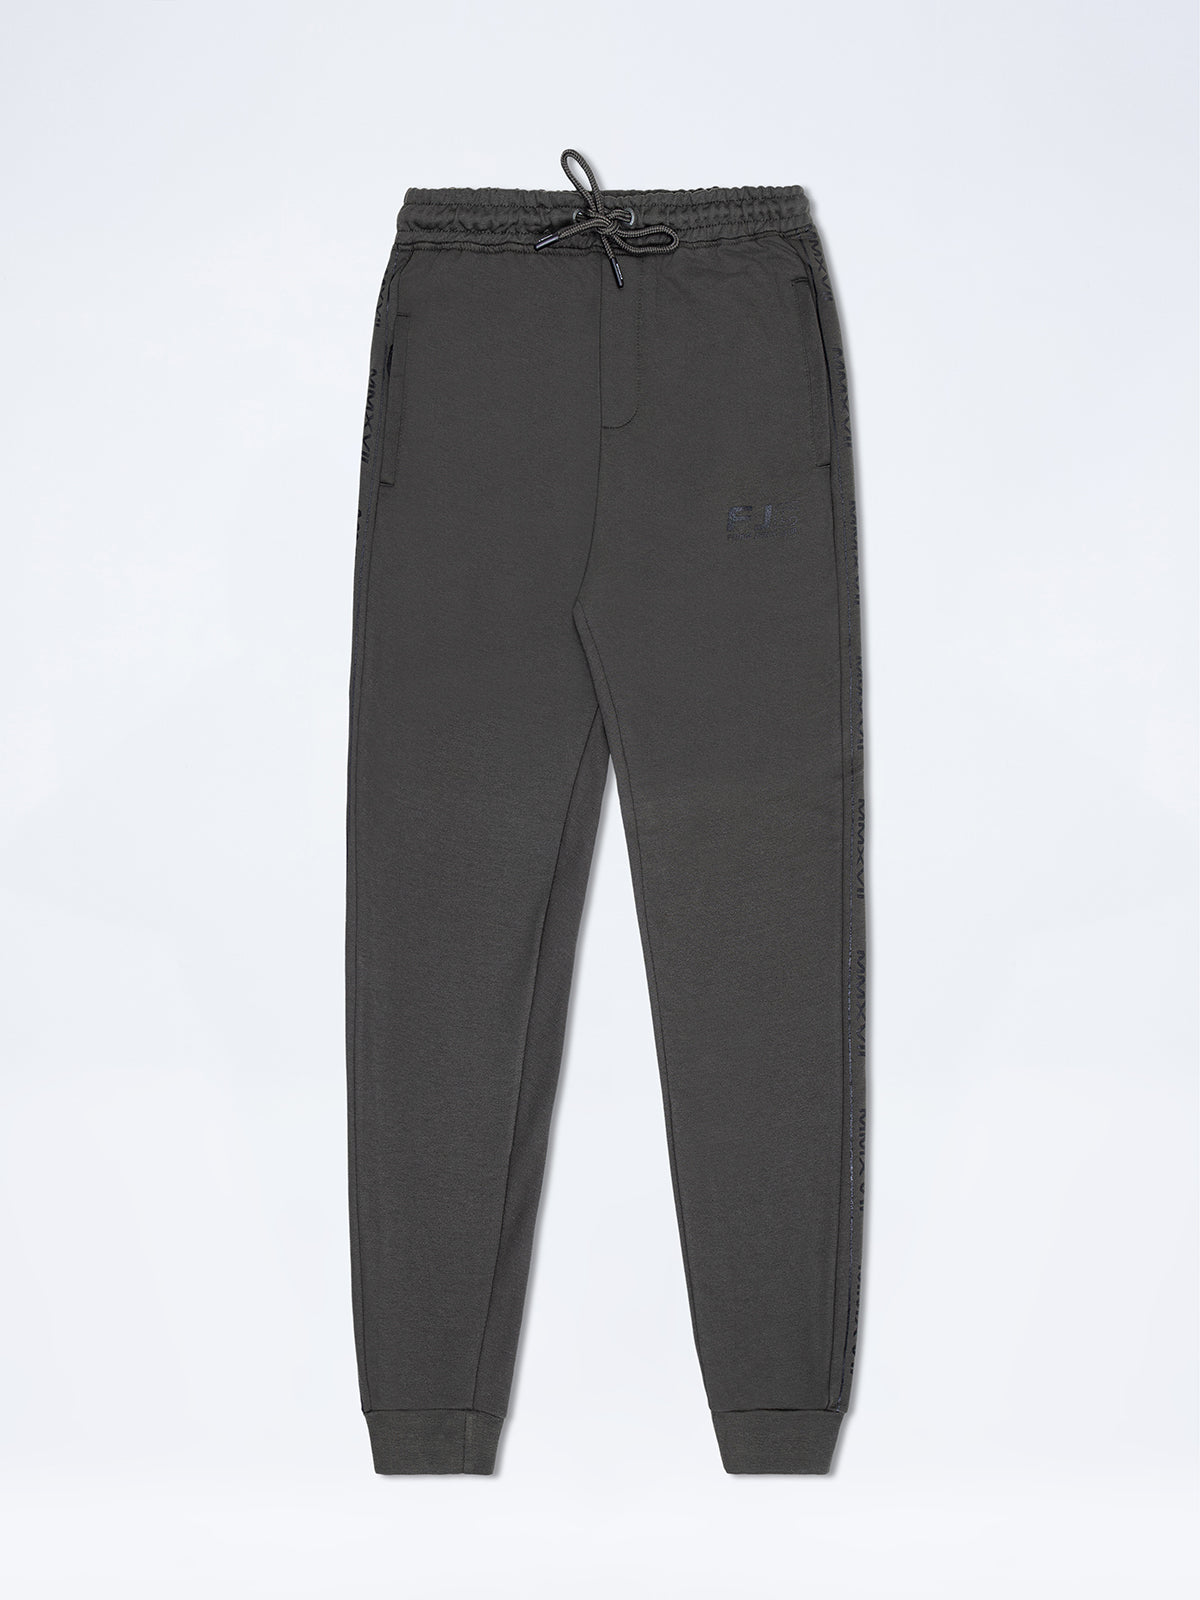 French Terry Jog Pant - FMBT24-007